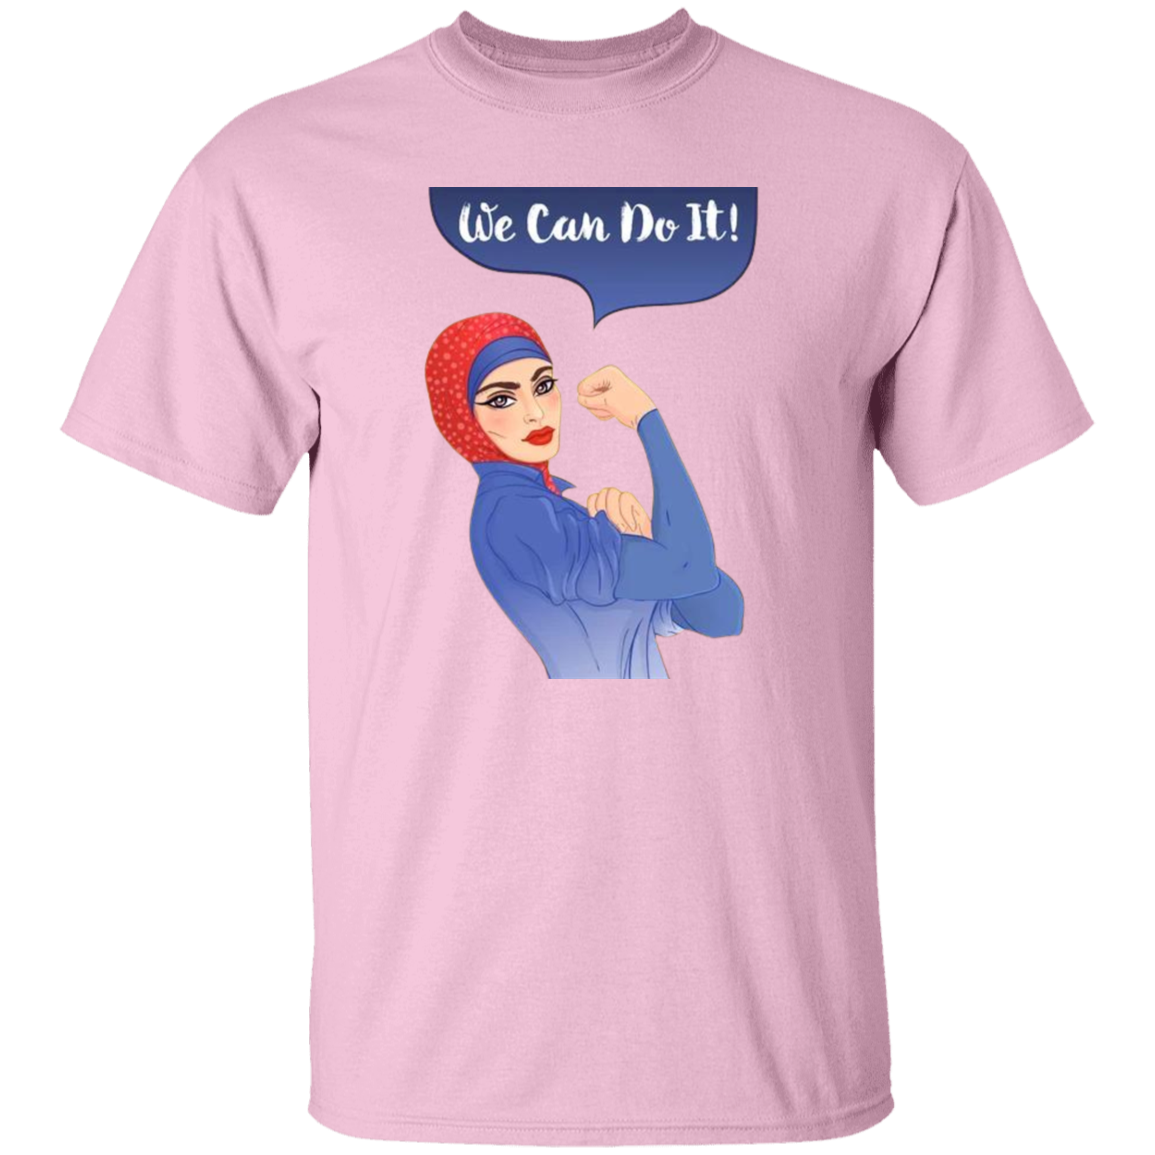 We Can Do It 5.3 oz. T-Shirt